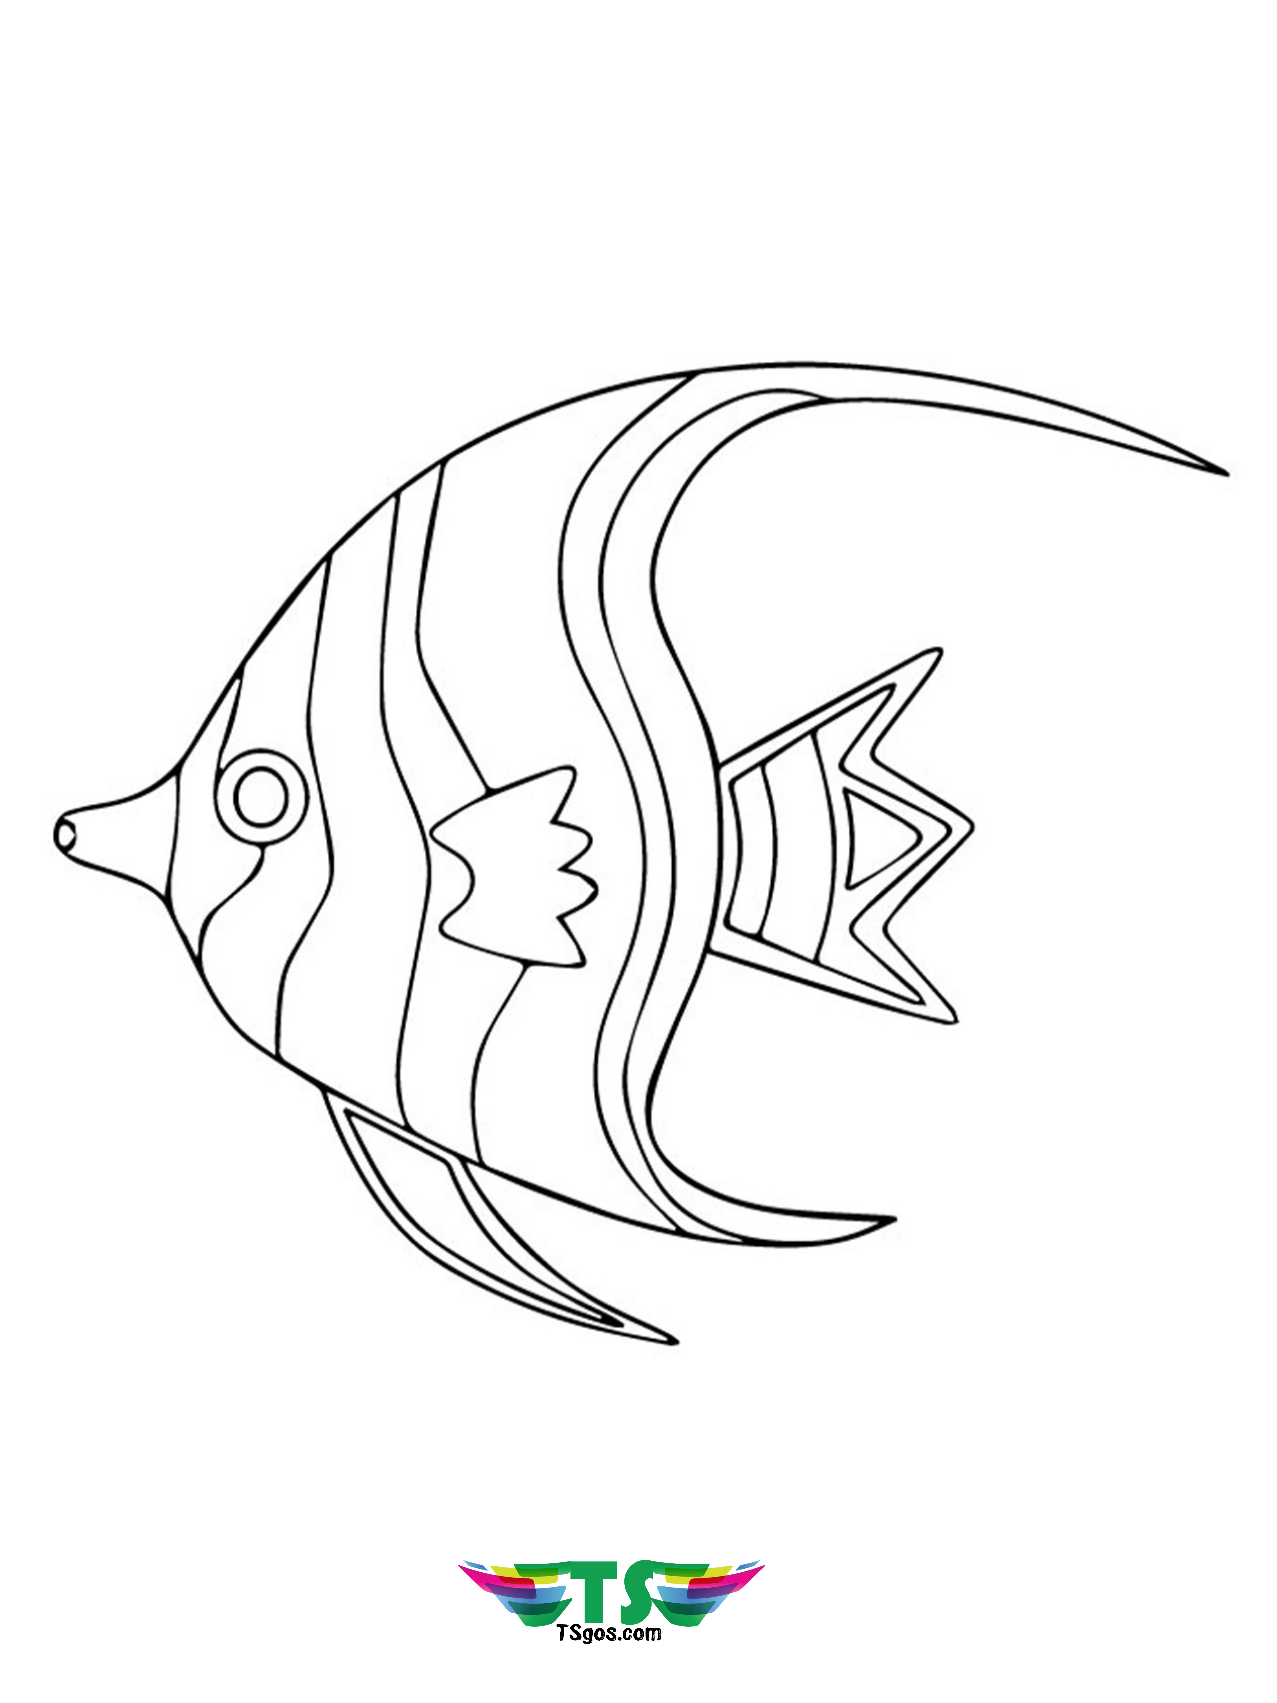 Beautiful fish coloring picture.